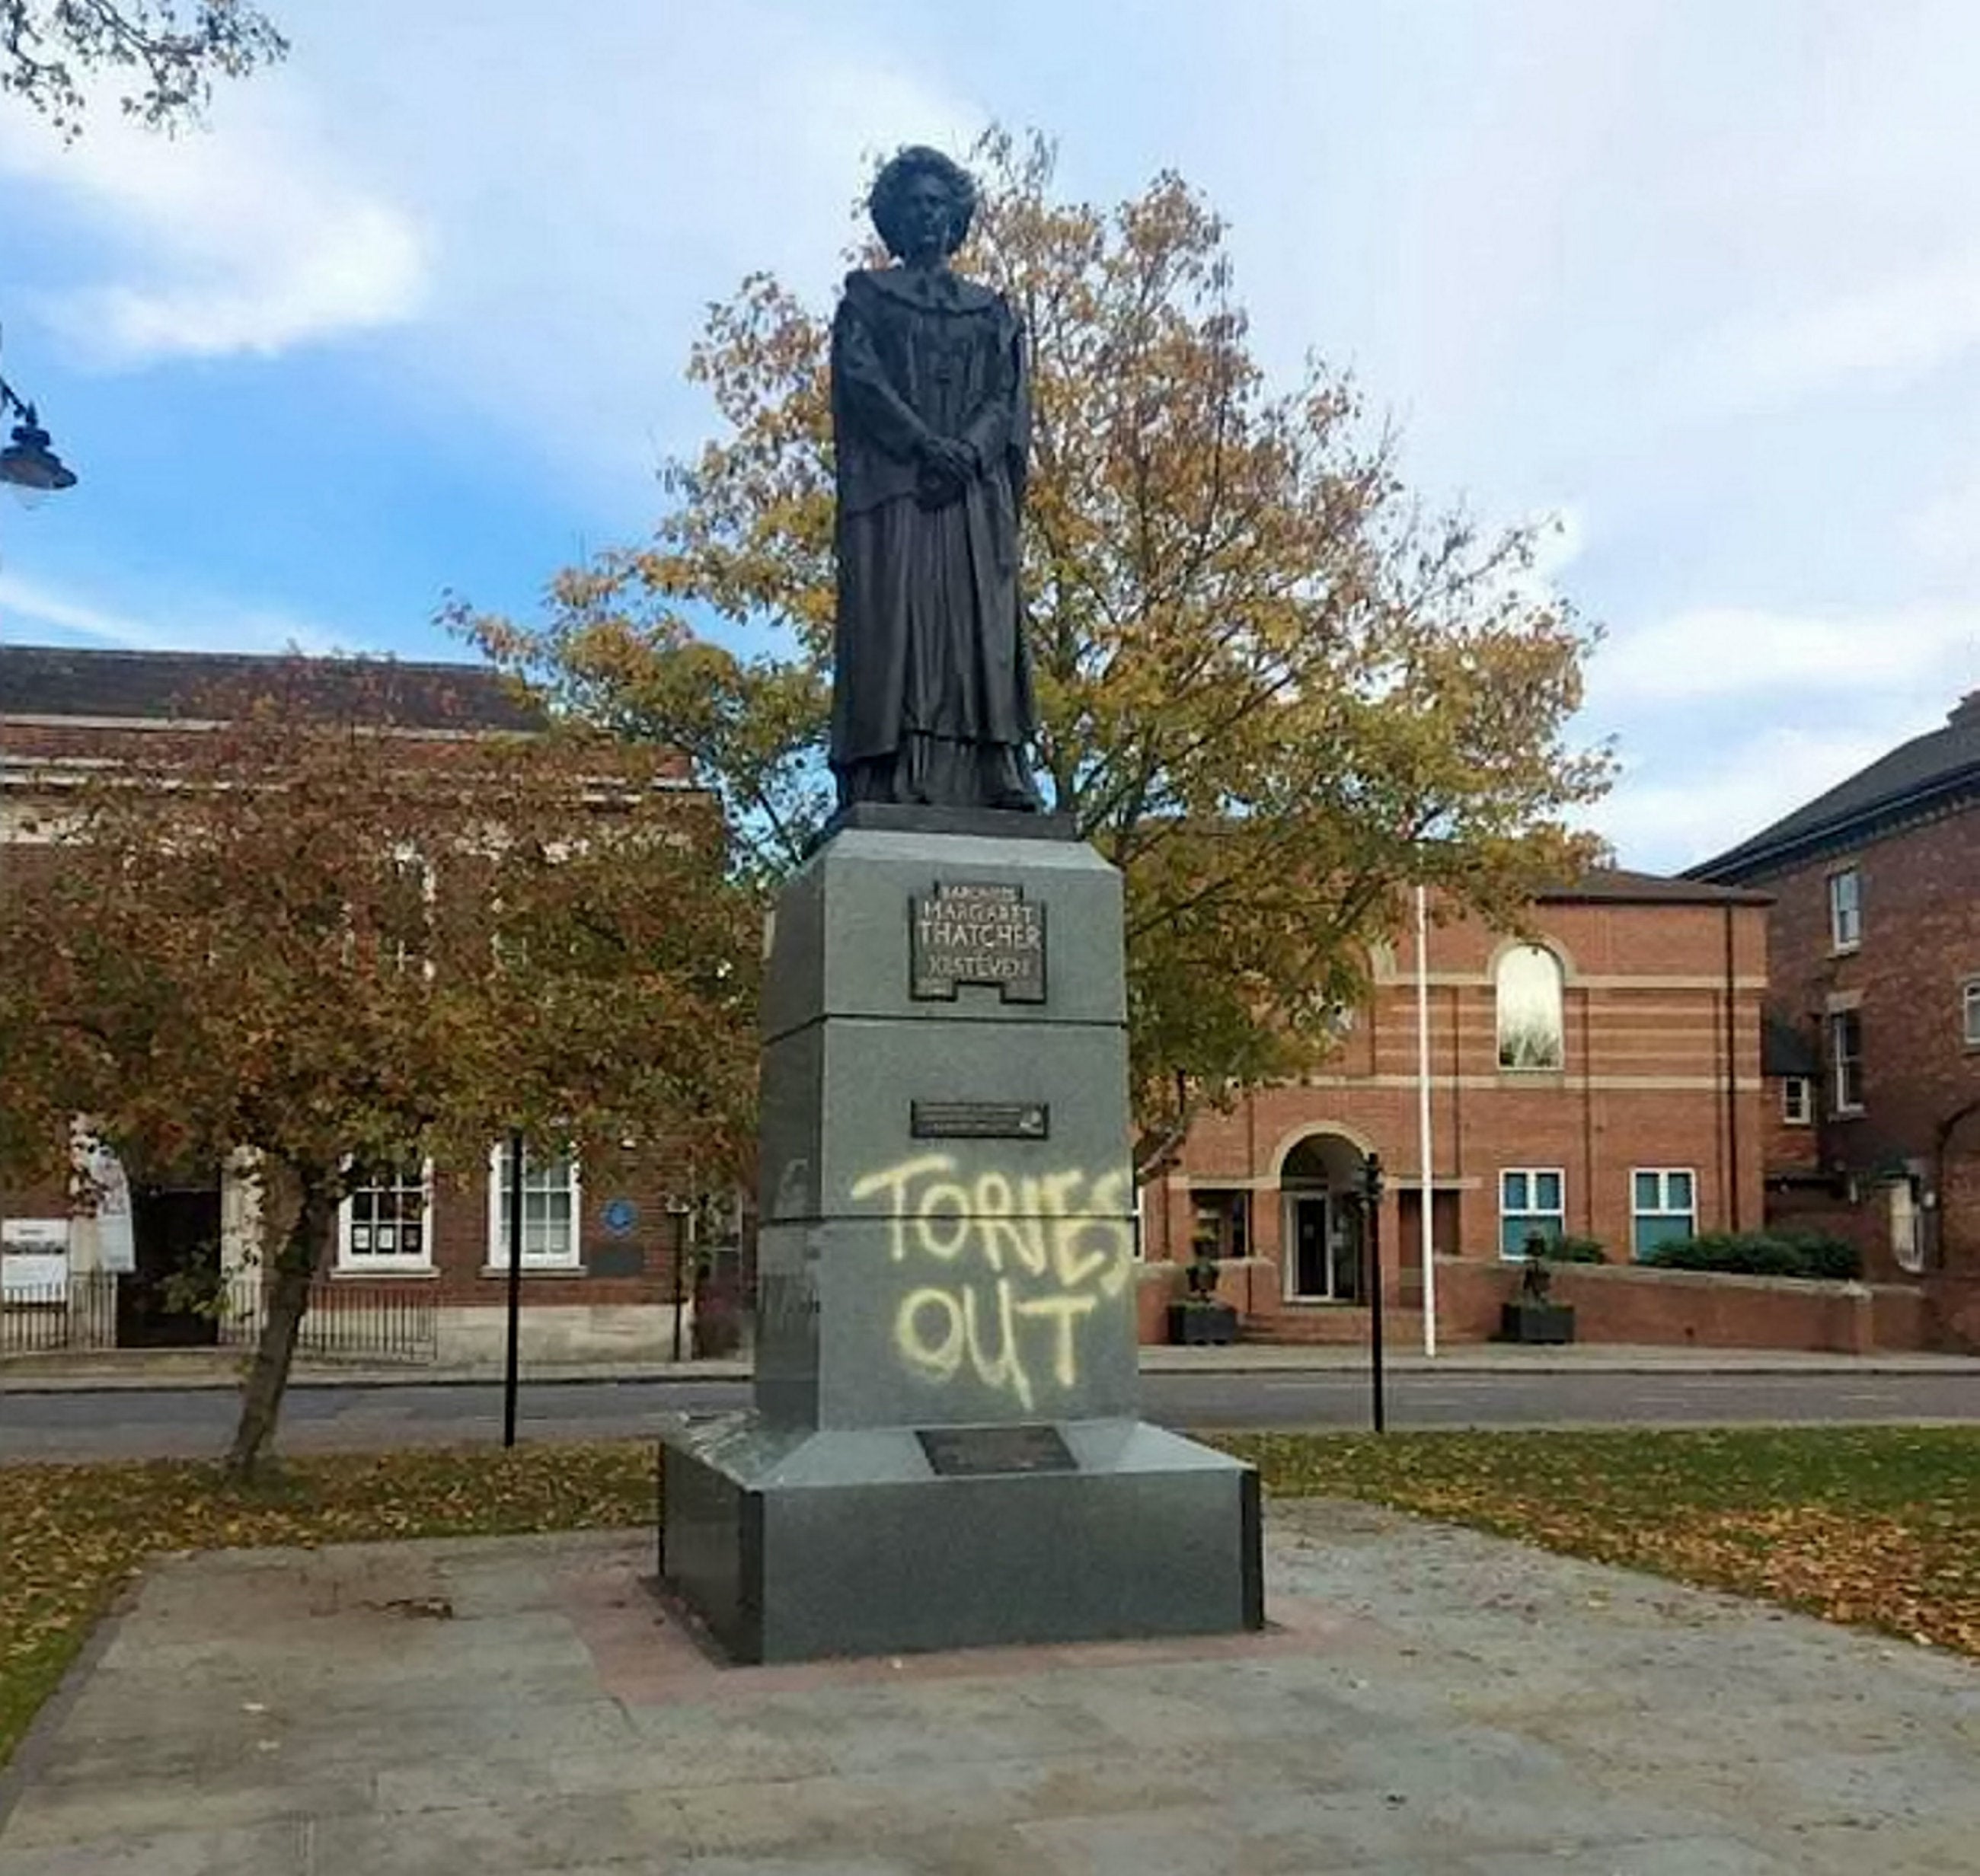 The statue, which sits on St Peter’s Hill, Grantham, has been spray painted with the words “Tories out”